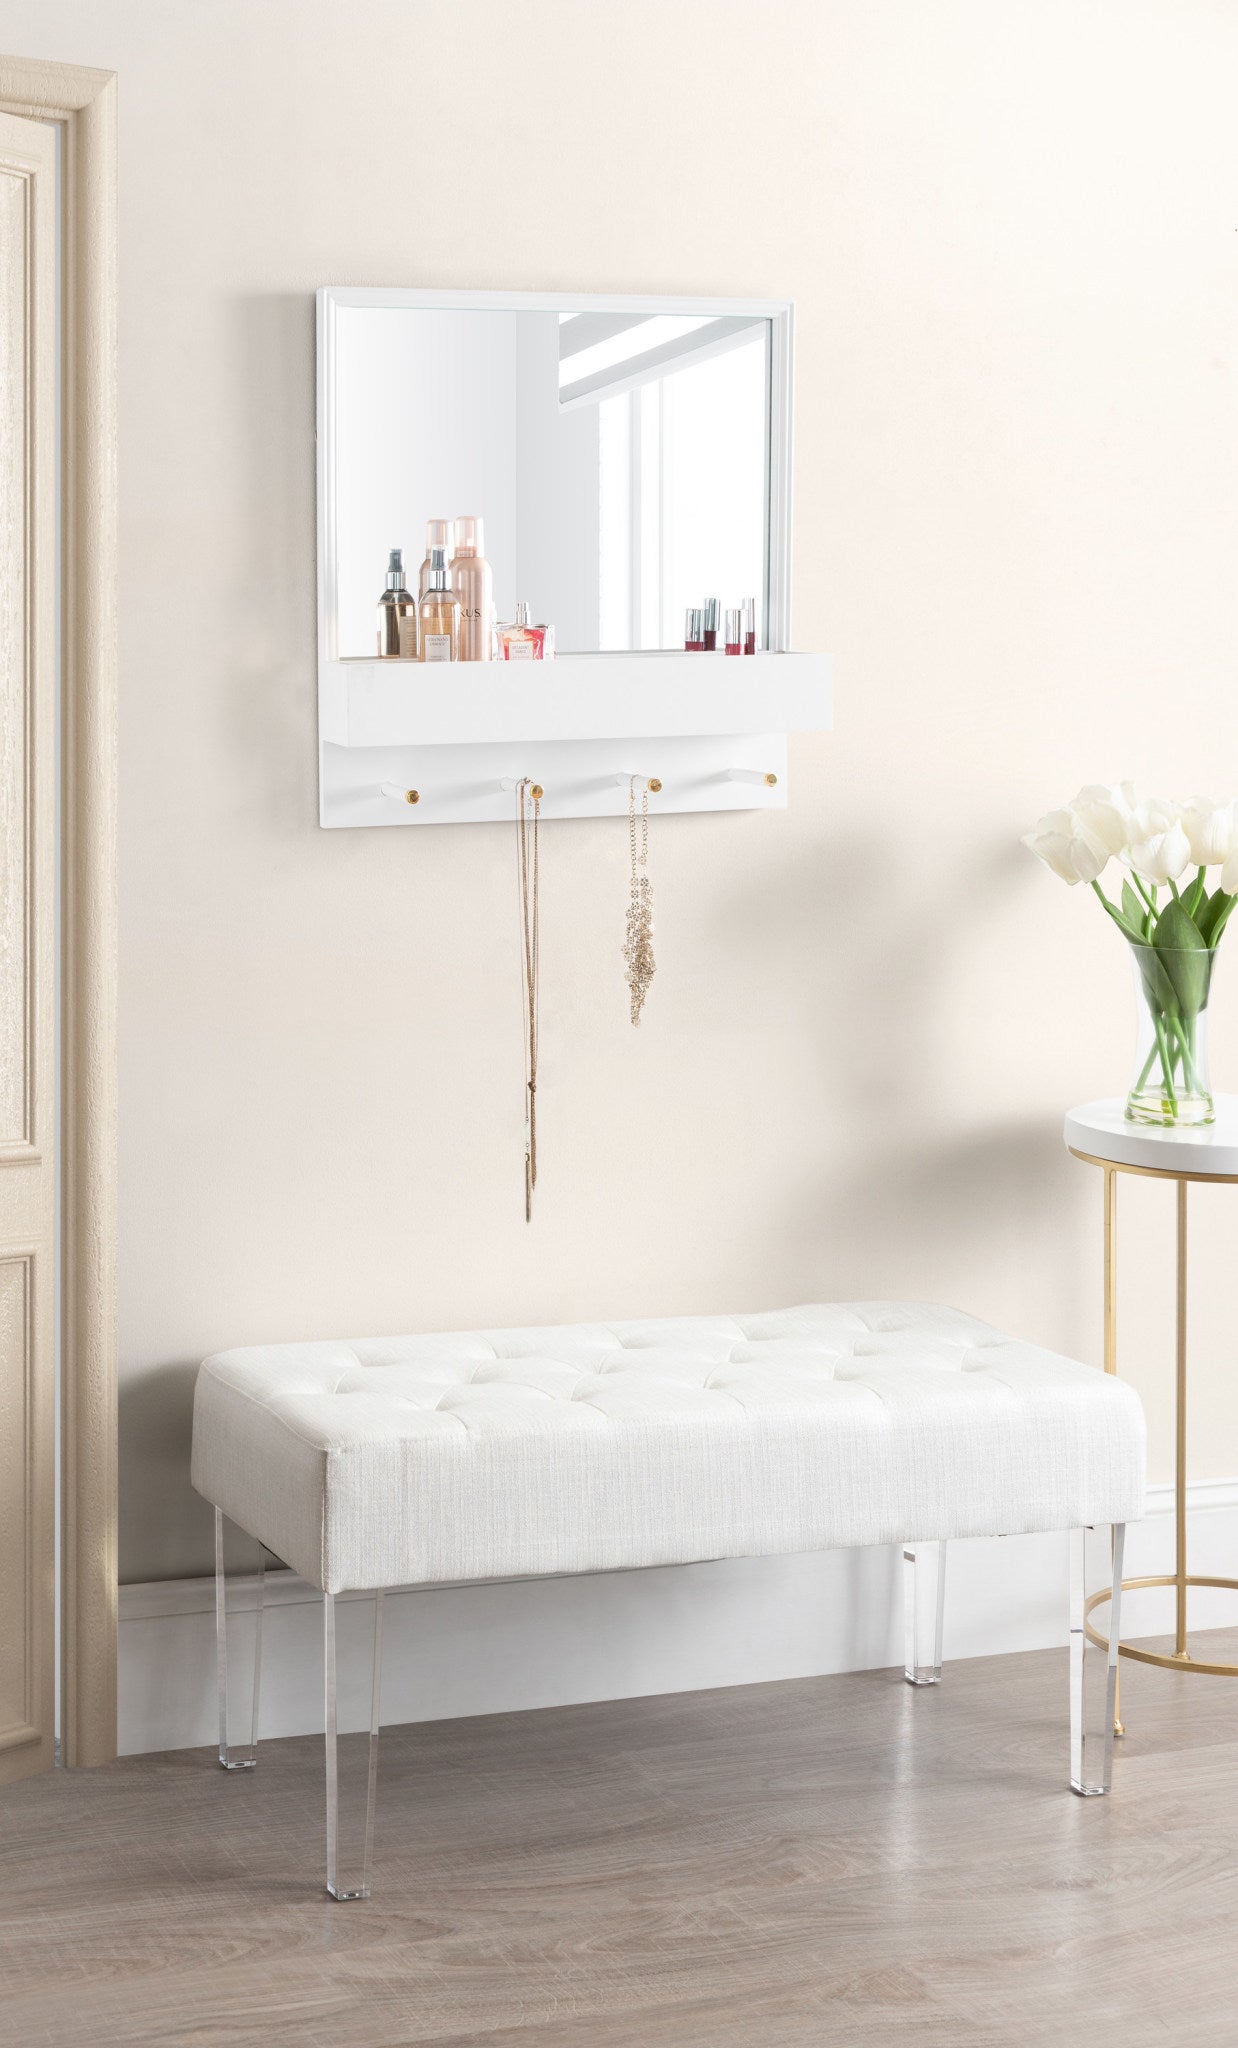 Adlynn Wall Mirror with Pocket and Pegs